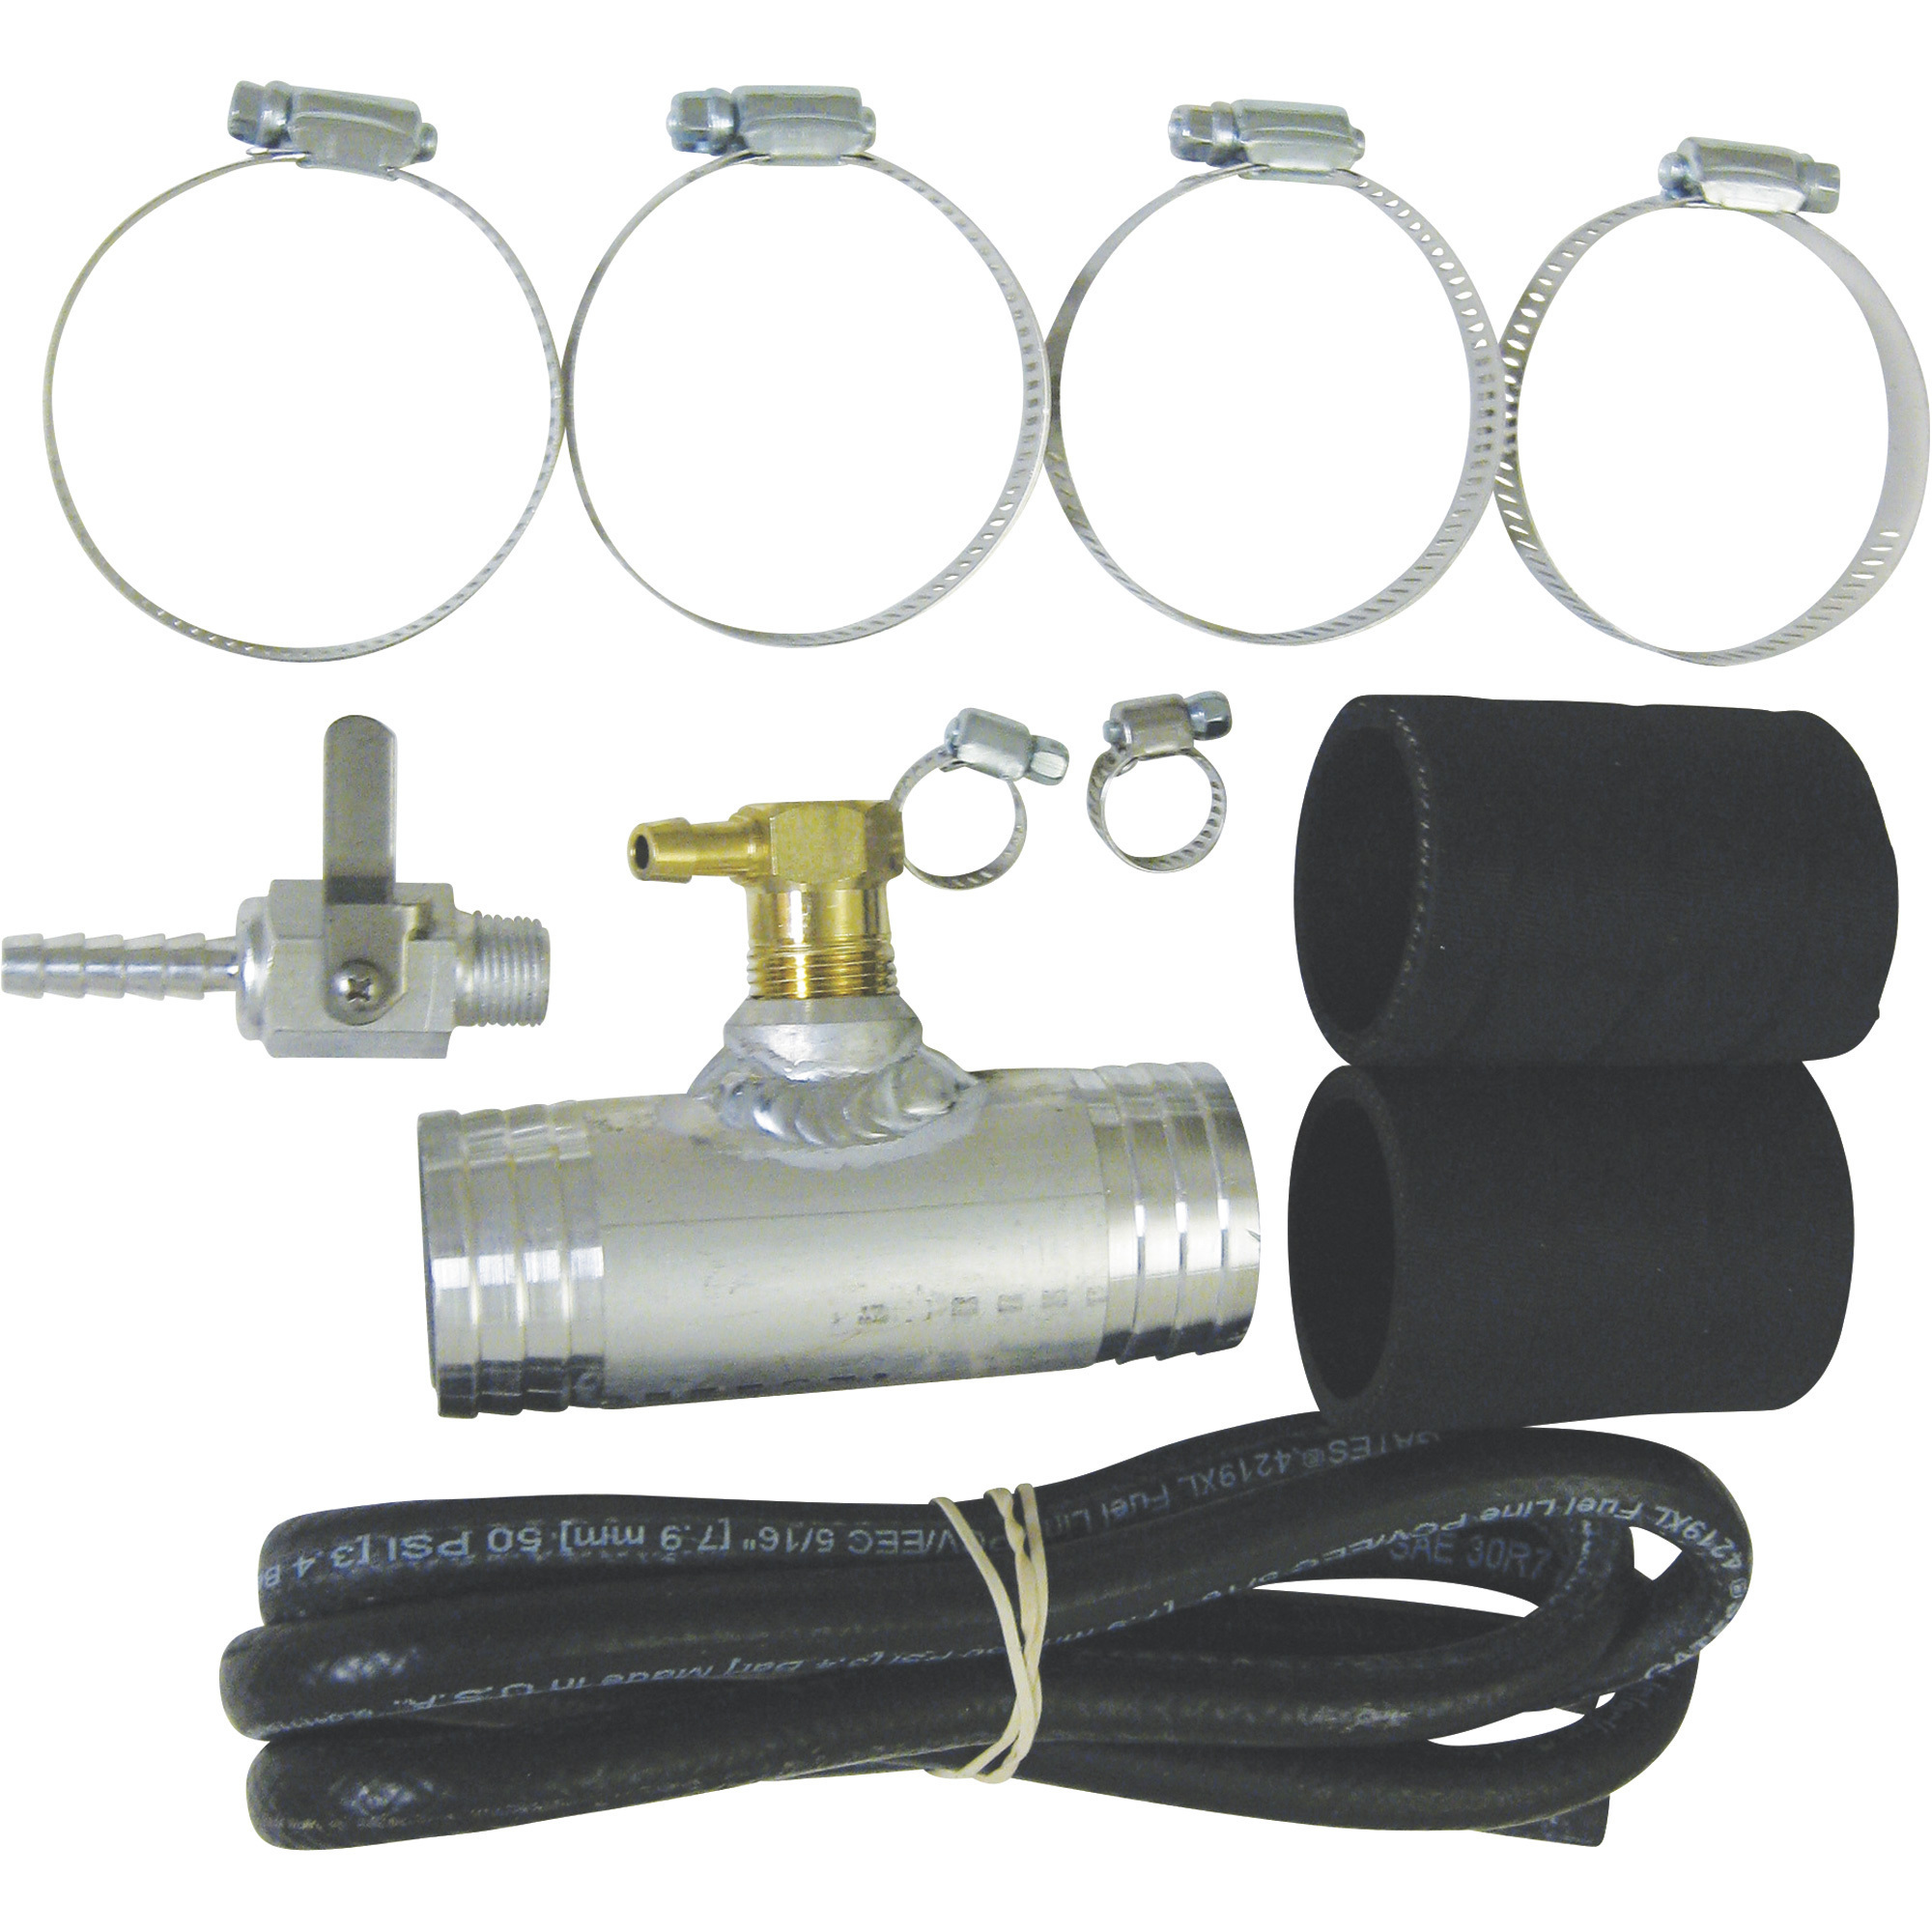 RDS Diesel Install Kit for Auxiliary Transfer Tank Conversion, Fits 2013-Current Dodge Diesel Passenger Trucks, Model 011408